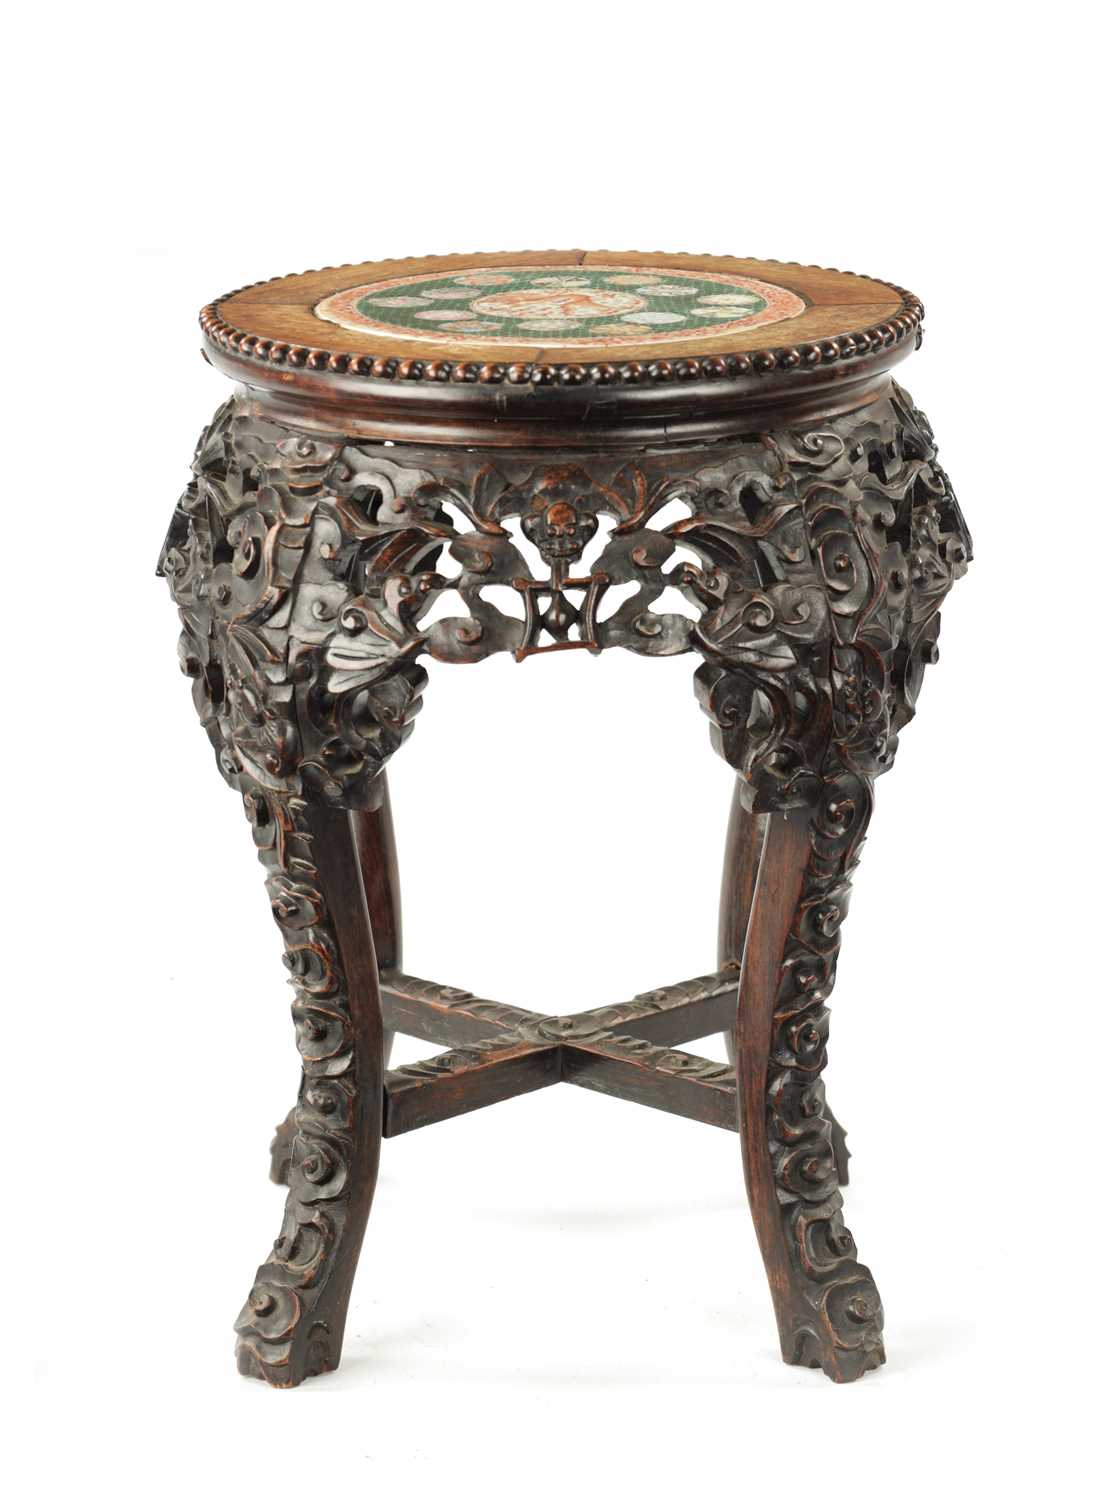 A 19TH CENTURY CHINESE HARDWOOD JARDINIERE STAND WITH CANTON PORCELAIN TOP